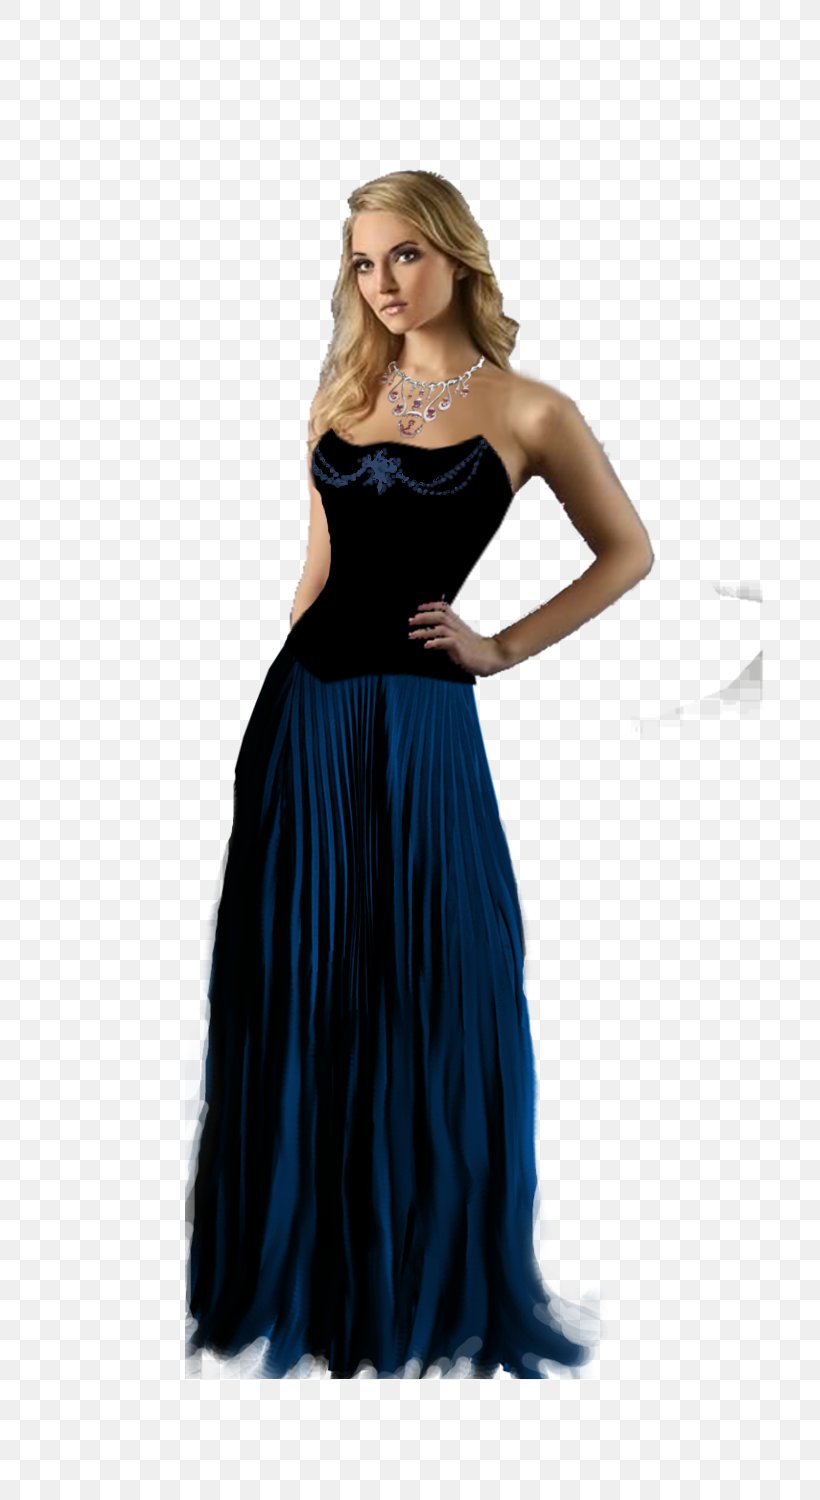 Gown Cocktail Dress Shoulder Fashion, PNG, 800x1500px, Gown, Bridal Party Dress, Cocktail, Cocktail Dress, Costume Download Free